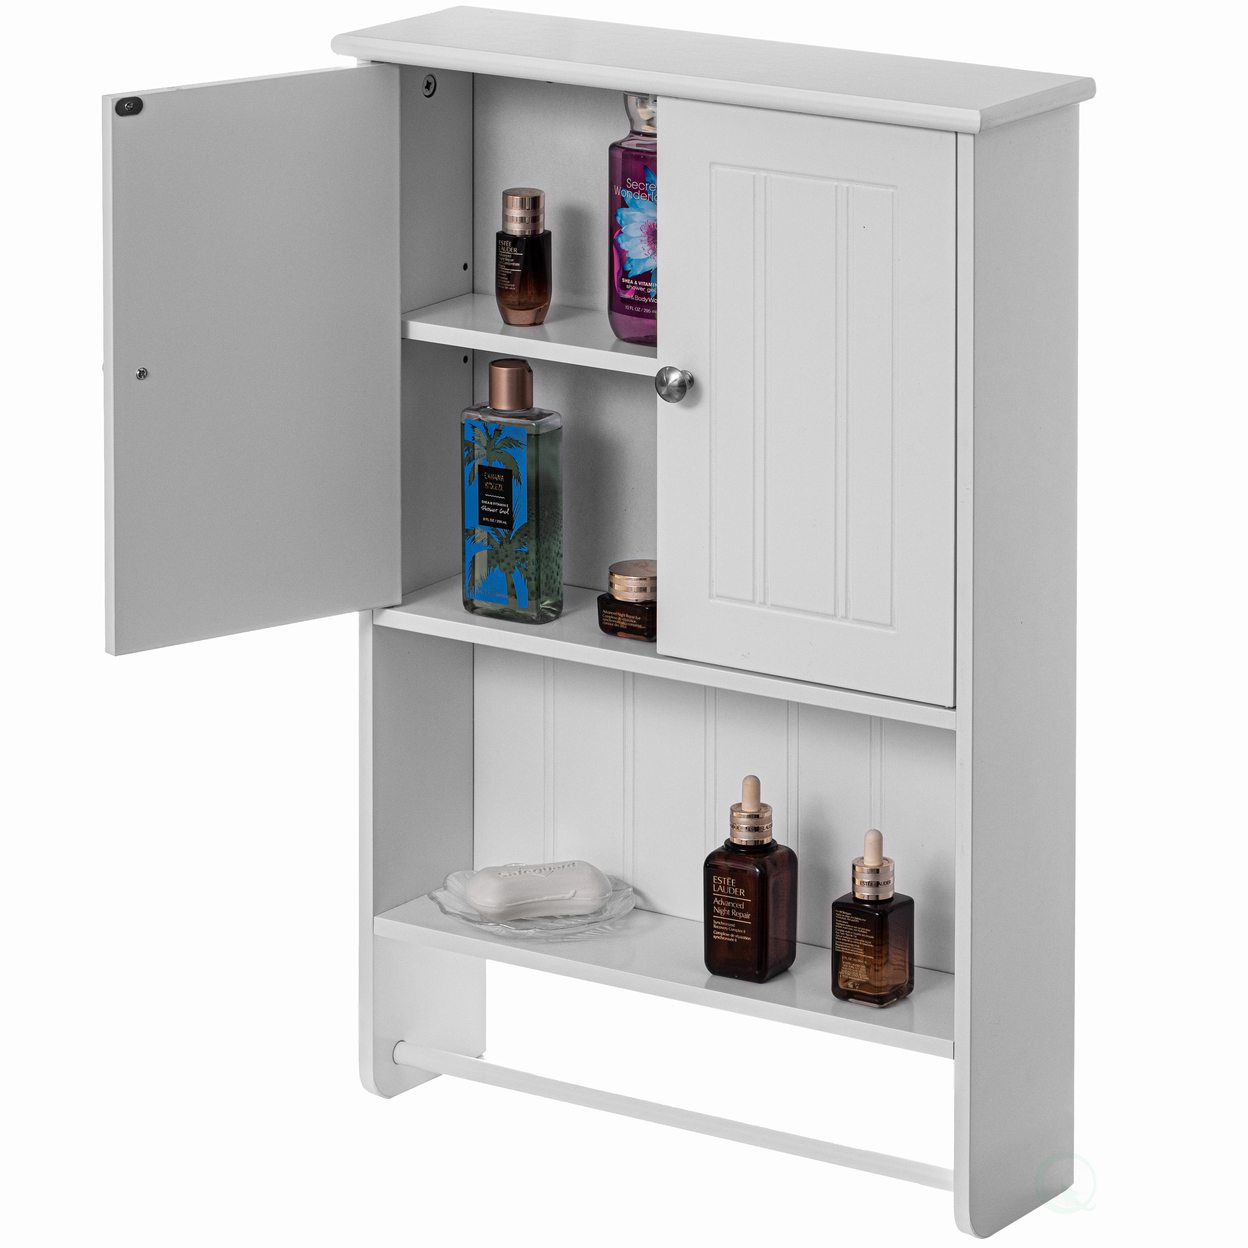 Wall Mount Bathroom Cabinet Wooden Medicine Cabinet Storage Organizer Double Door With 2 Shelves, And Open Display Shelf, With Towel Bar - W